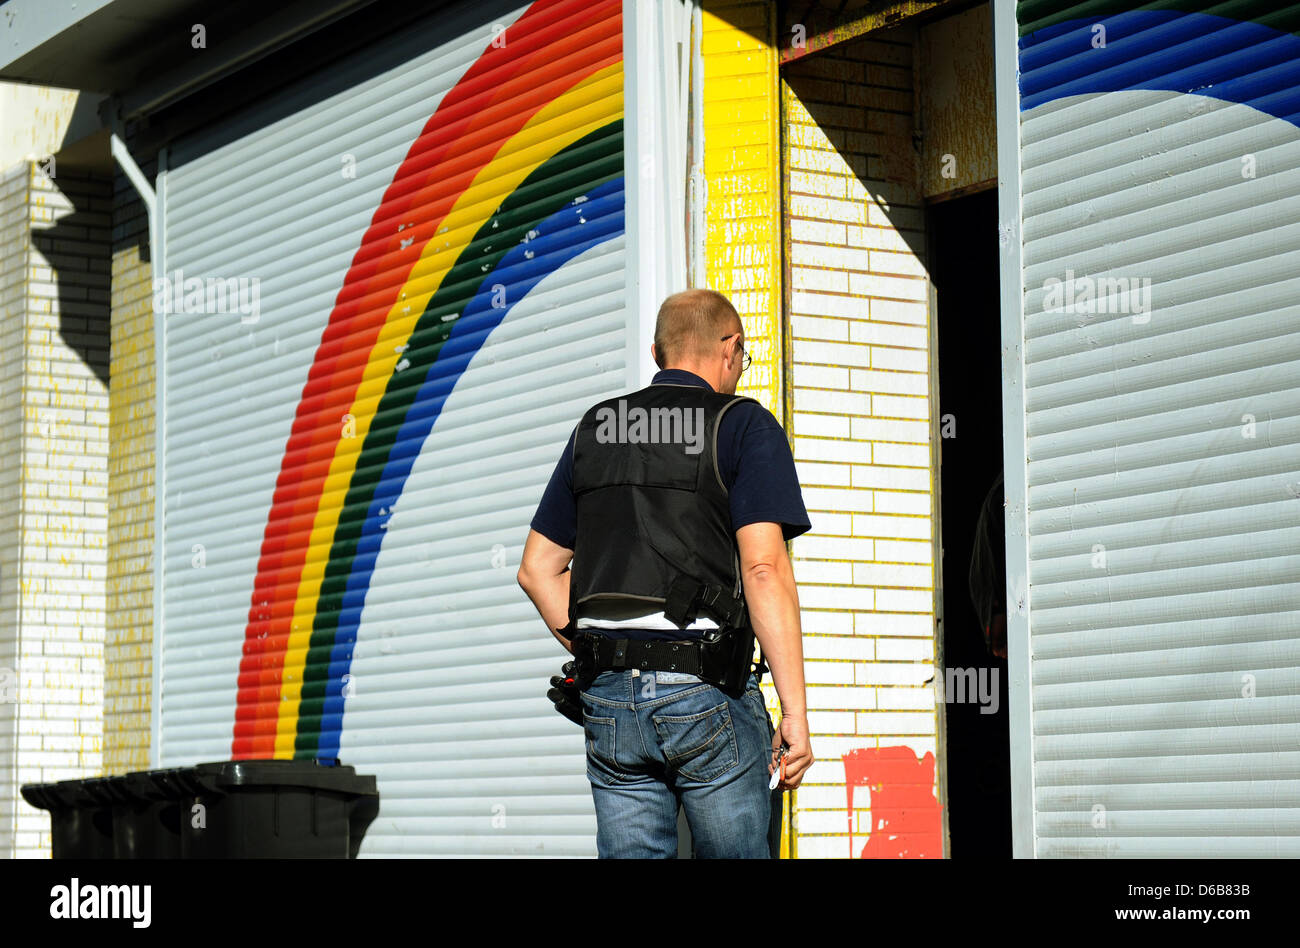 A police officer participates in a house search in Dortmund, Germany, 23 August 2012. Police were out in force after the North Rhine-Westphalian Interior Minister outlawed three right-wing extremist organizations, the 'Kameradschaft Aachener Land', the 'Nationaler Widerstand Dortmund' and the 'Kameradschaft Hamm'. Photo: CAROLINE SEIDEL Stock Photo